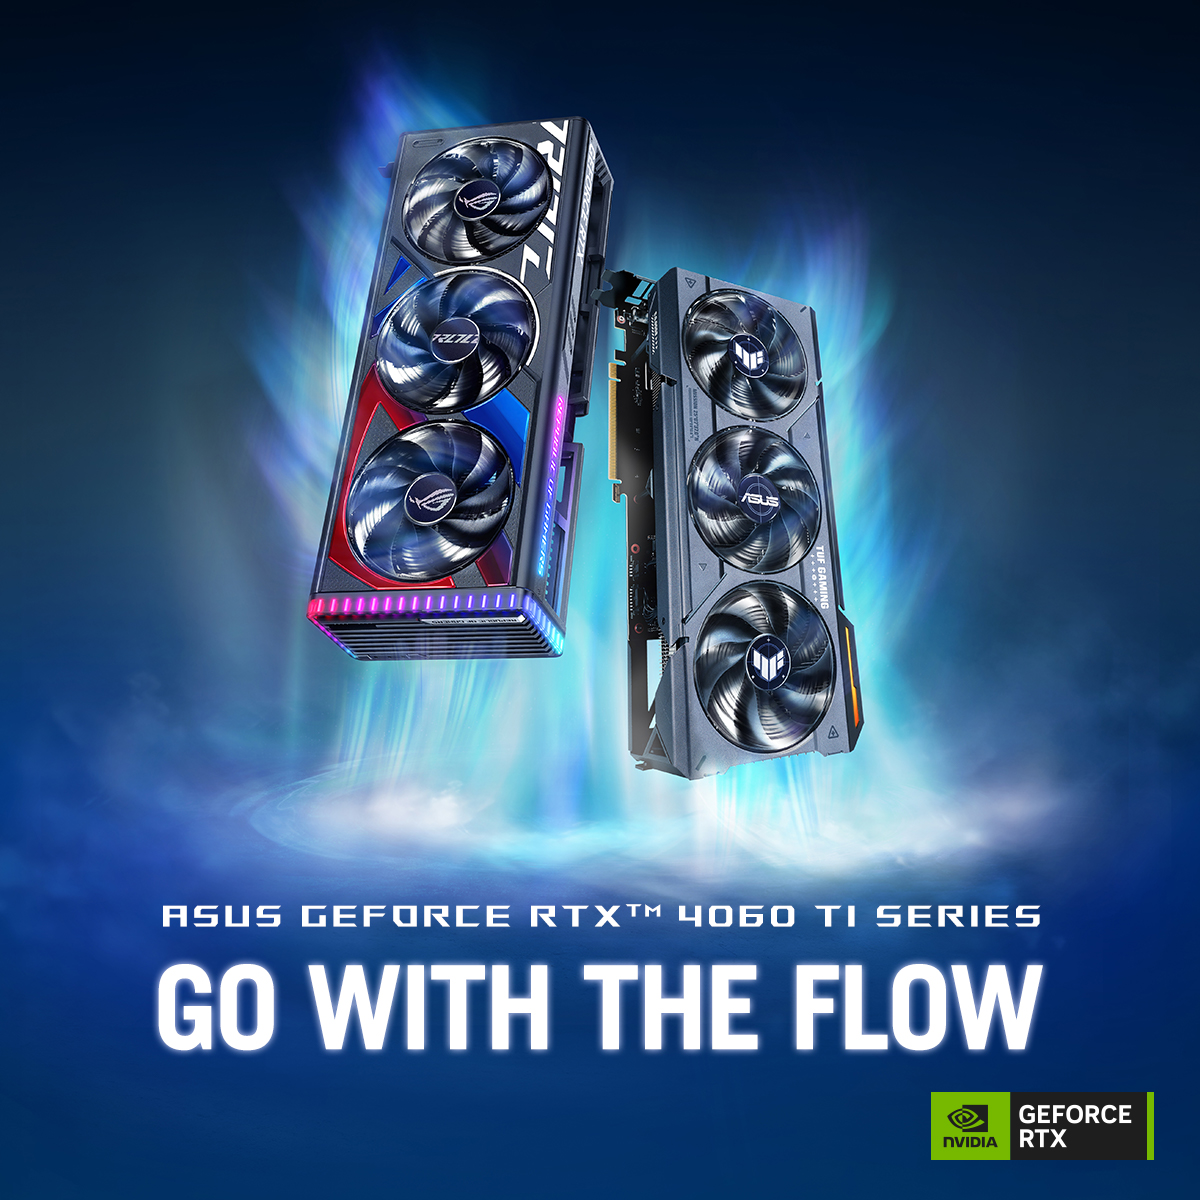 Elevate your game with the RTX 4060 Ti Series, fueled by @NVIDIA's innovative Ada Lovelace architecture. Unleash the gamer in you with our newest range from #ROGStrix and #TUFGaming.

Check it out👉 rog.gg/GetInTheGame